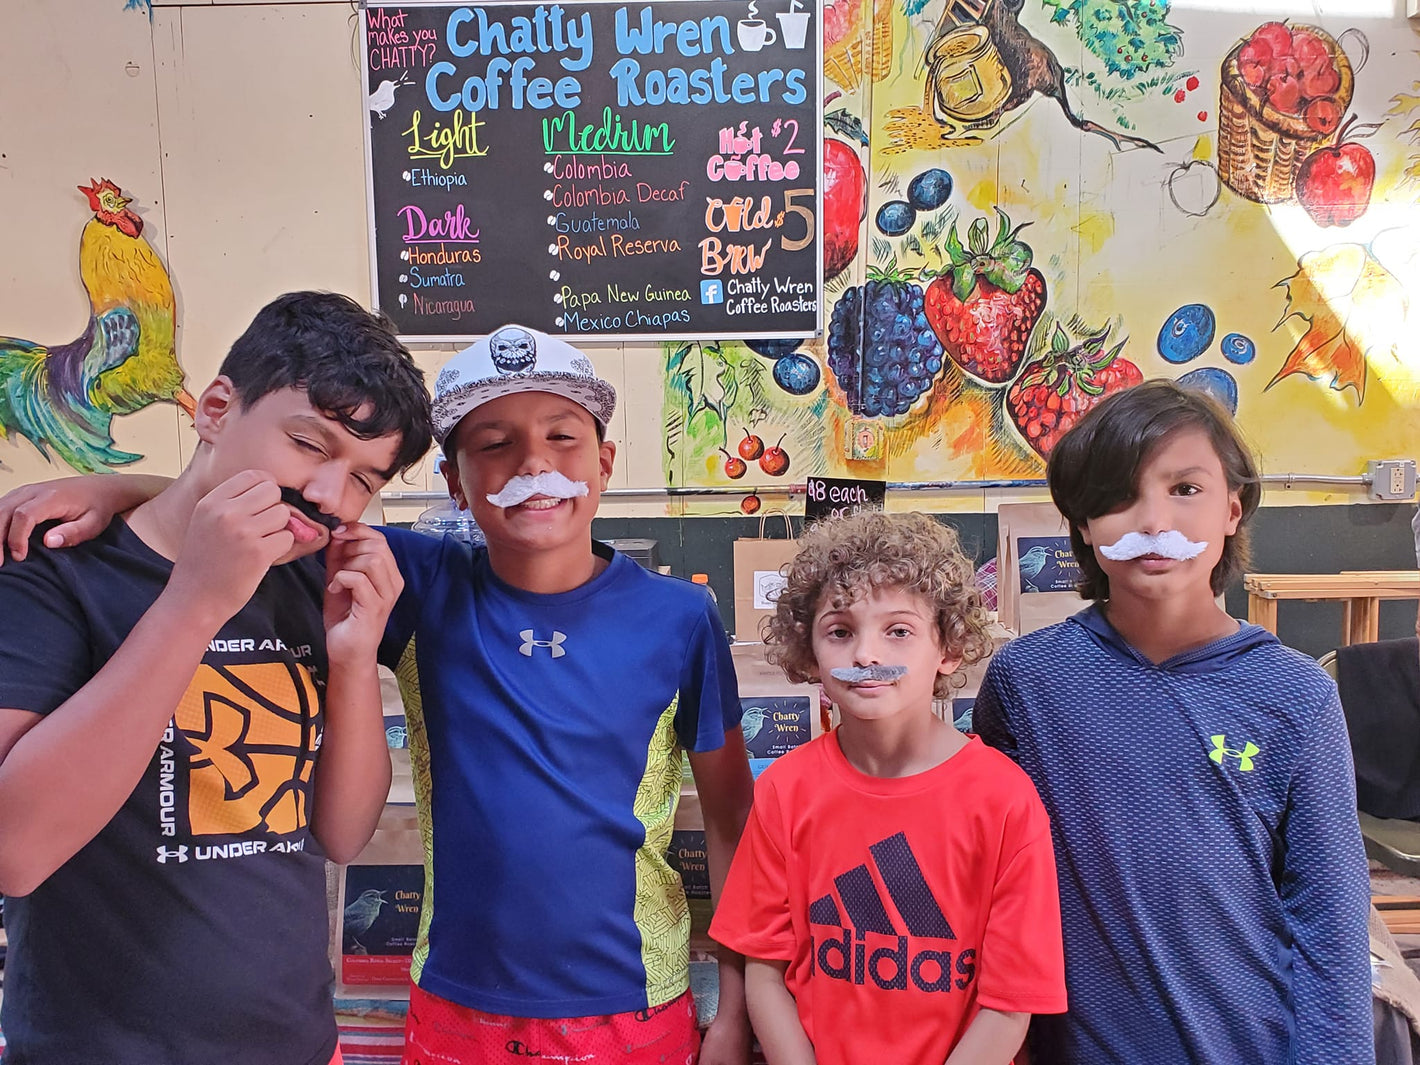 Kids posing with mustaches